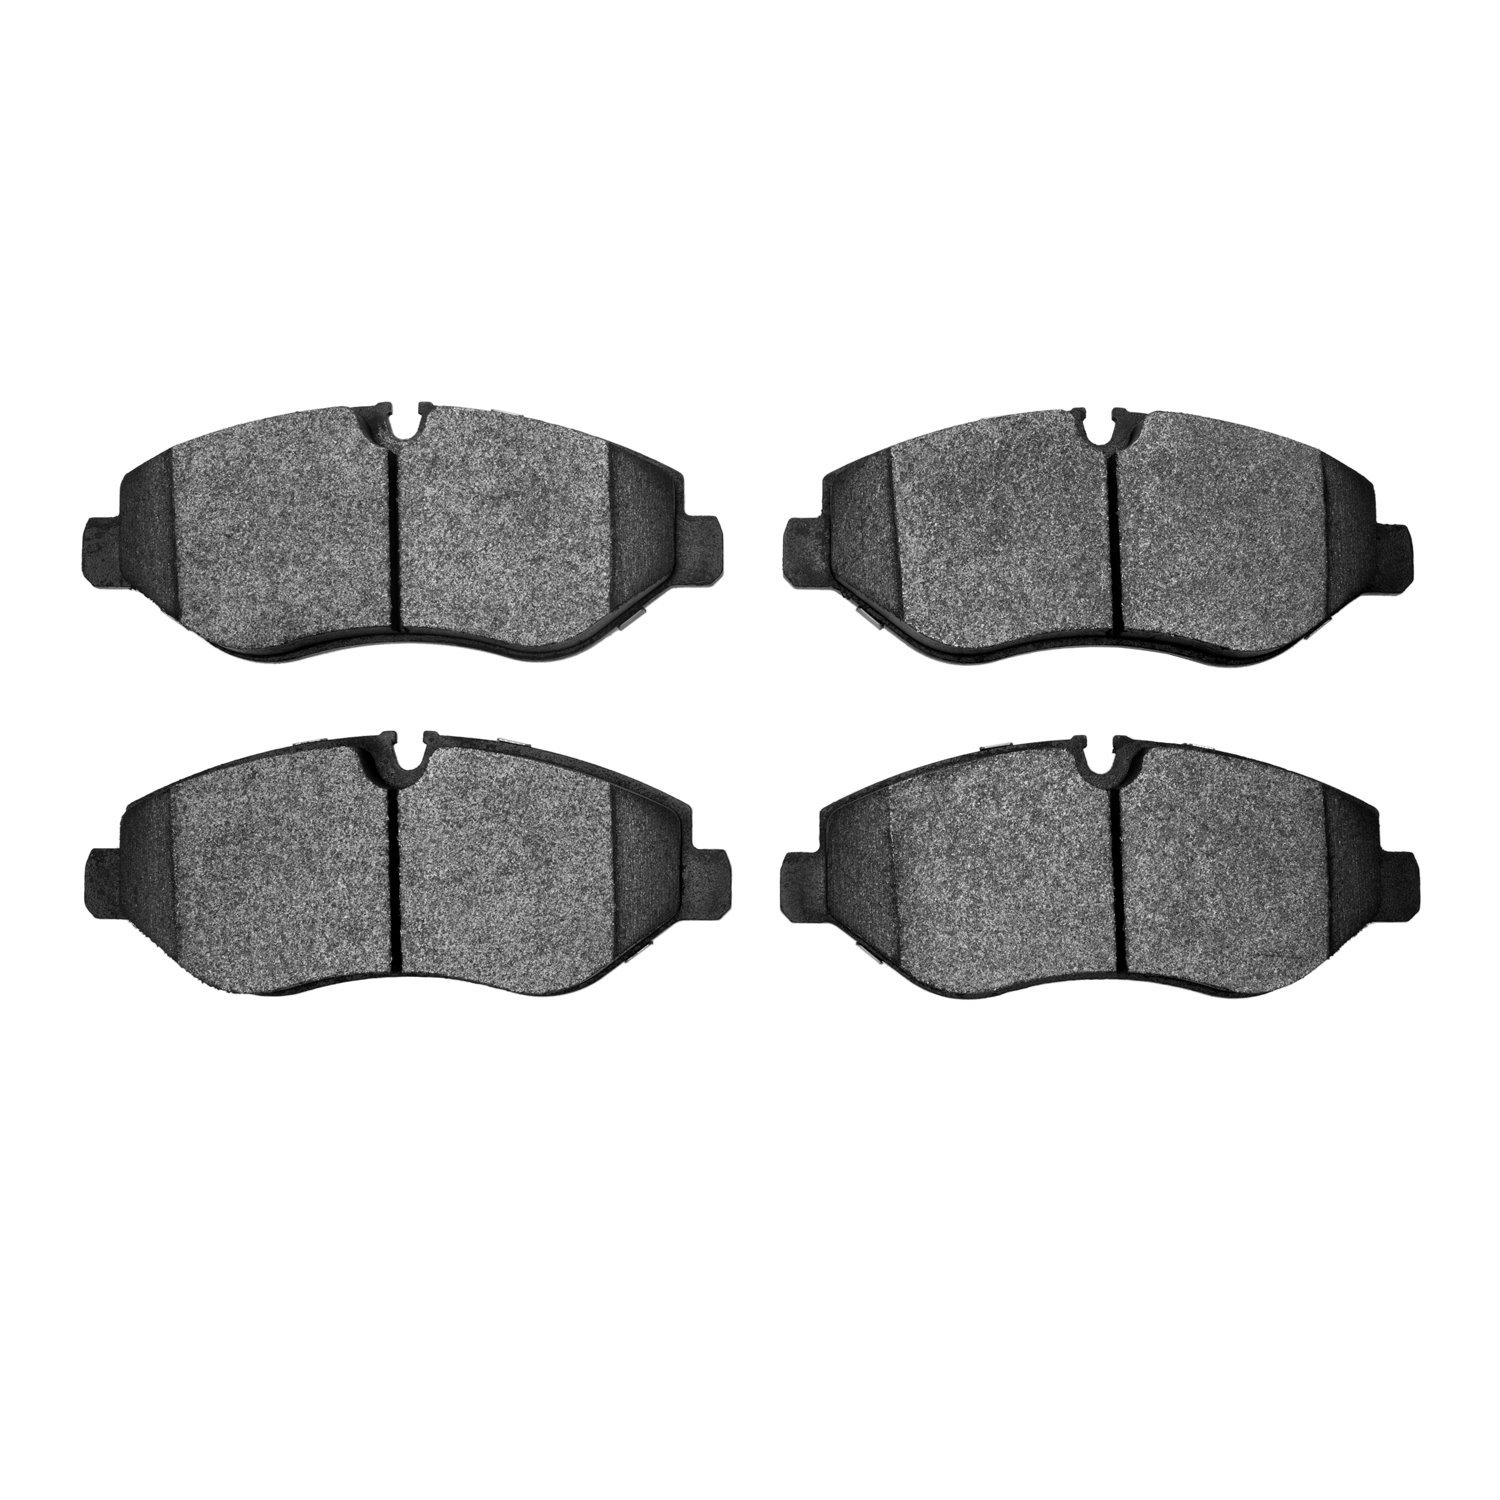 Semi-Metallic Brake Pads, Fits Select Fits Multiple Makes/Models, Position: Front